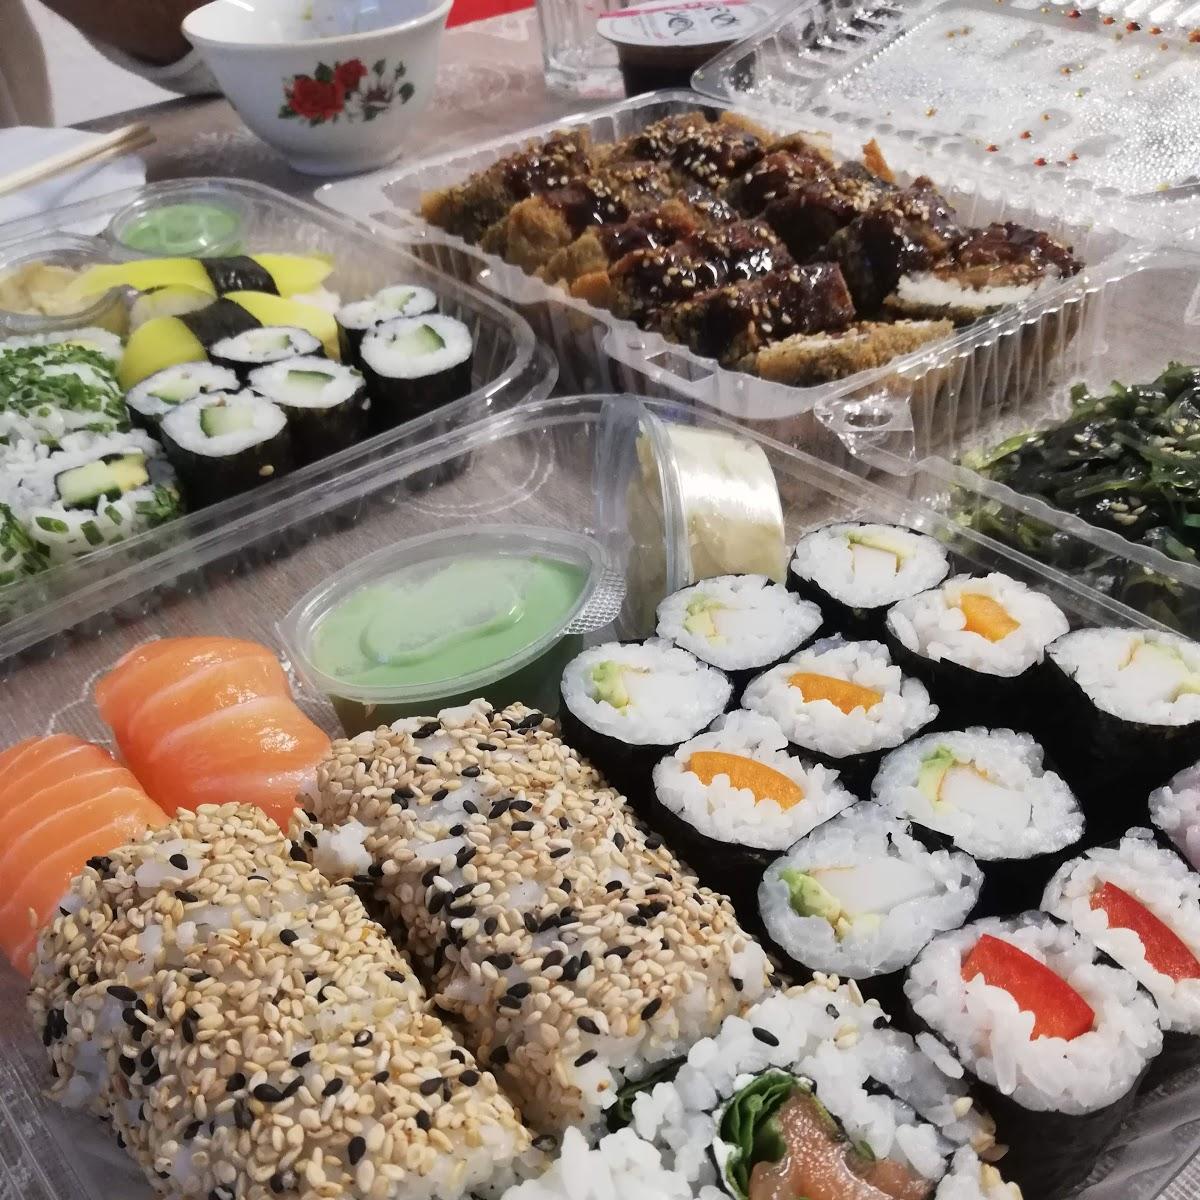 Restaurant "Sushi For You" in Berlin